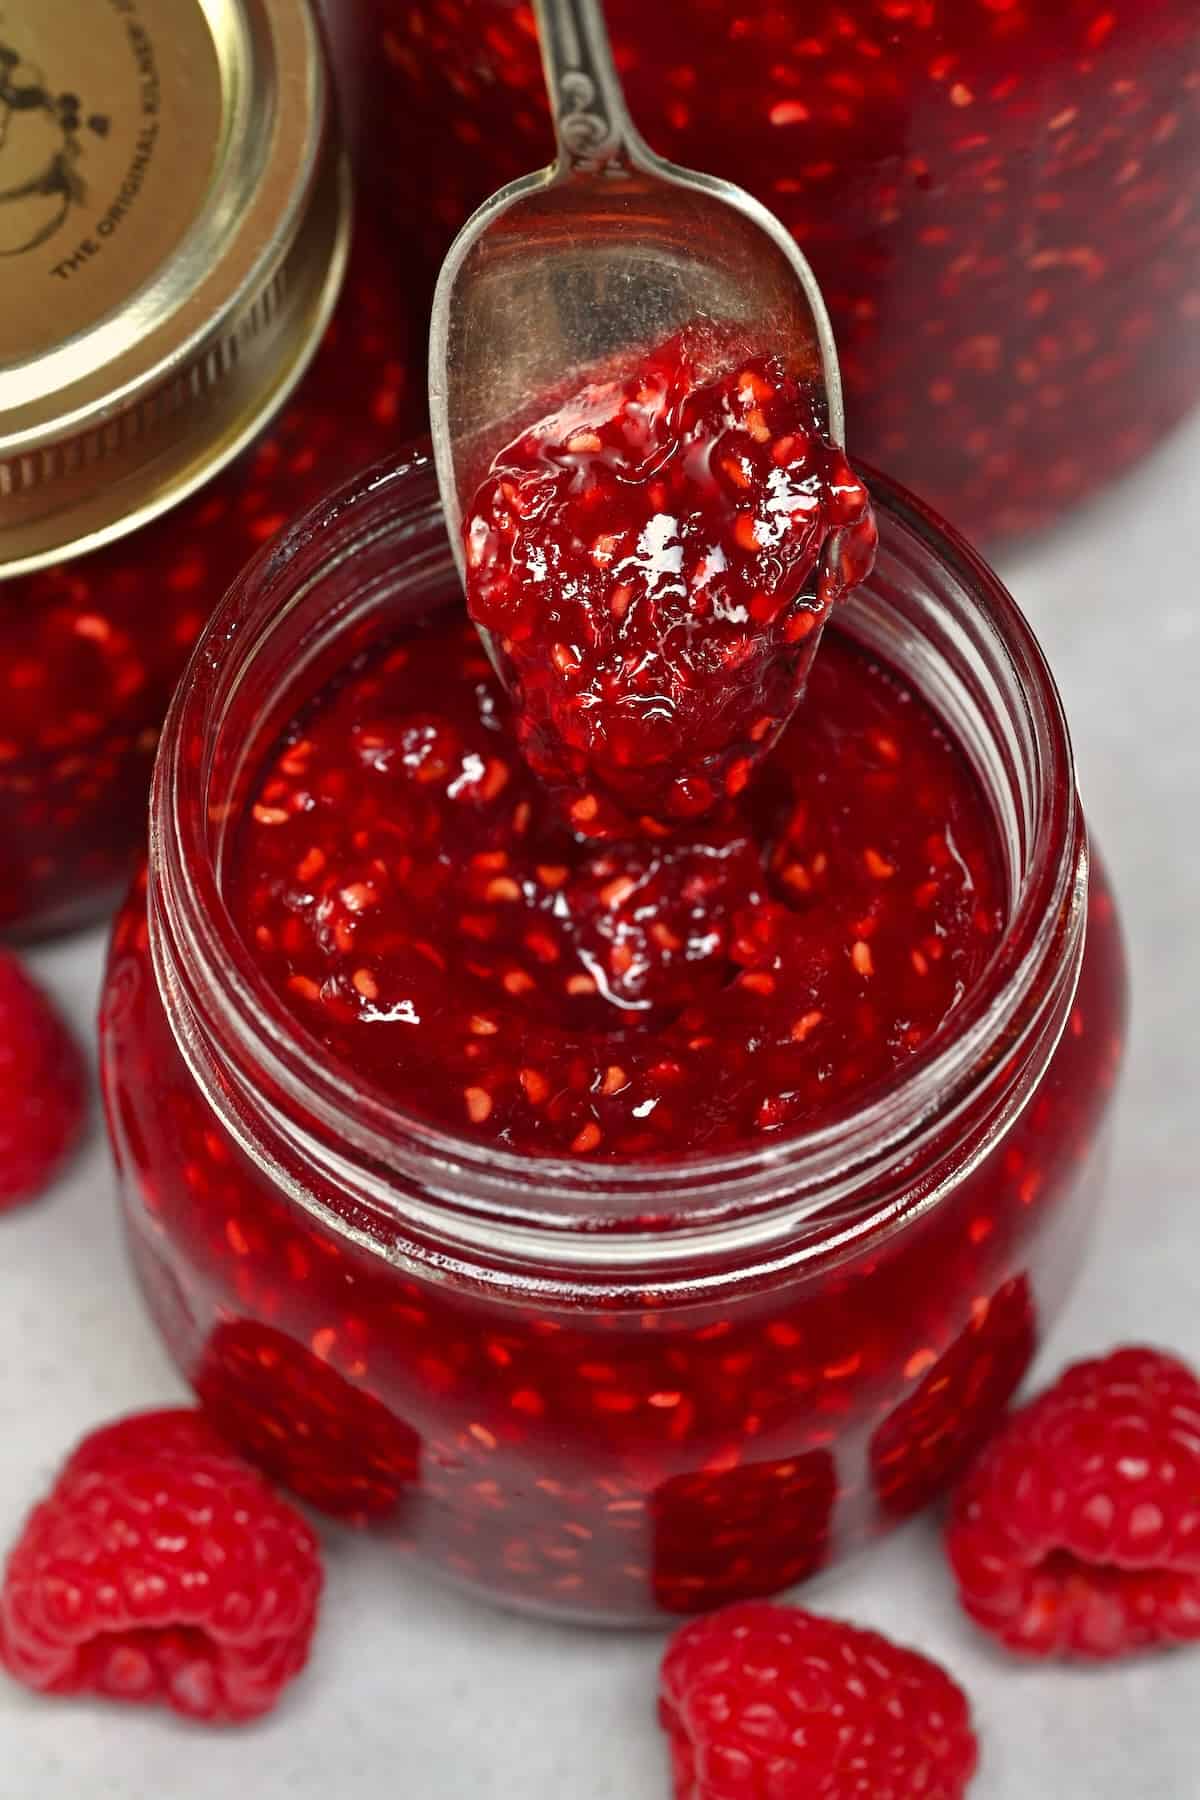 Raspberry Jam Recipe for Canning {The BEST!} - The Frugal Girls